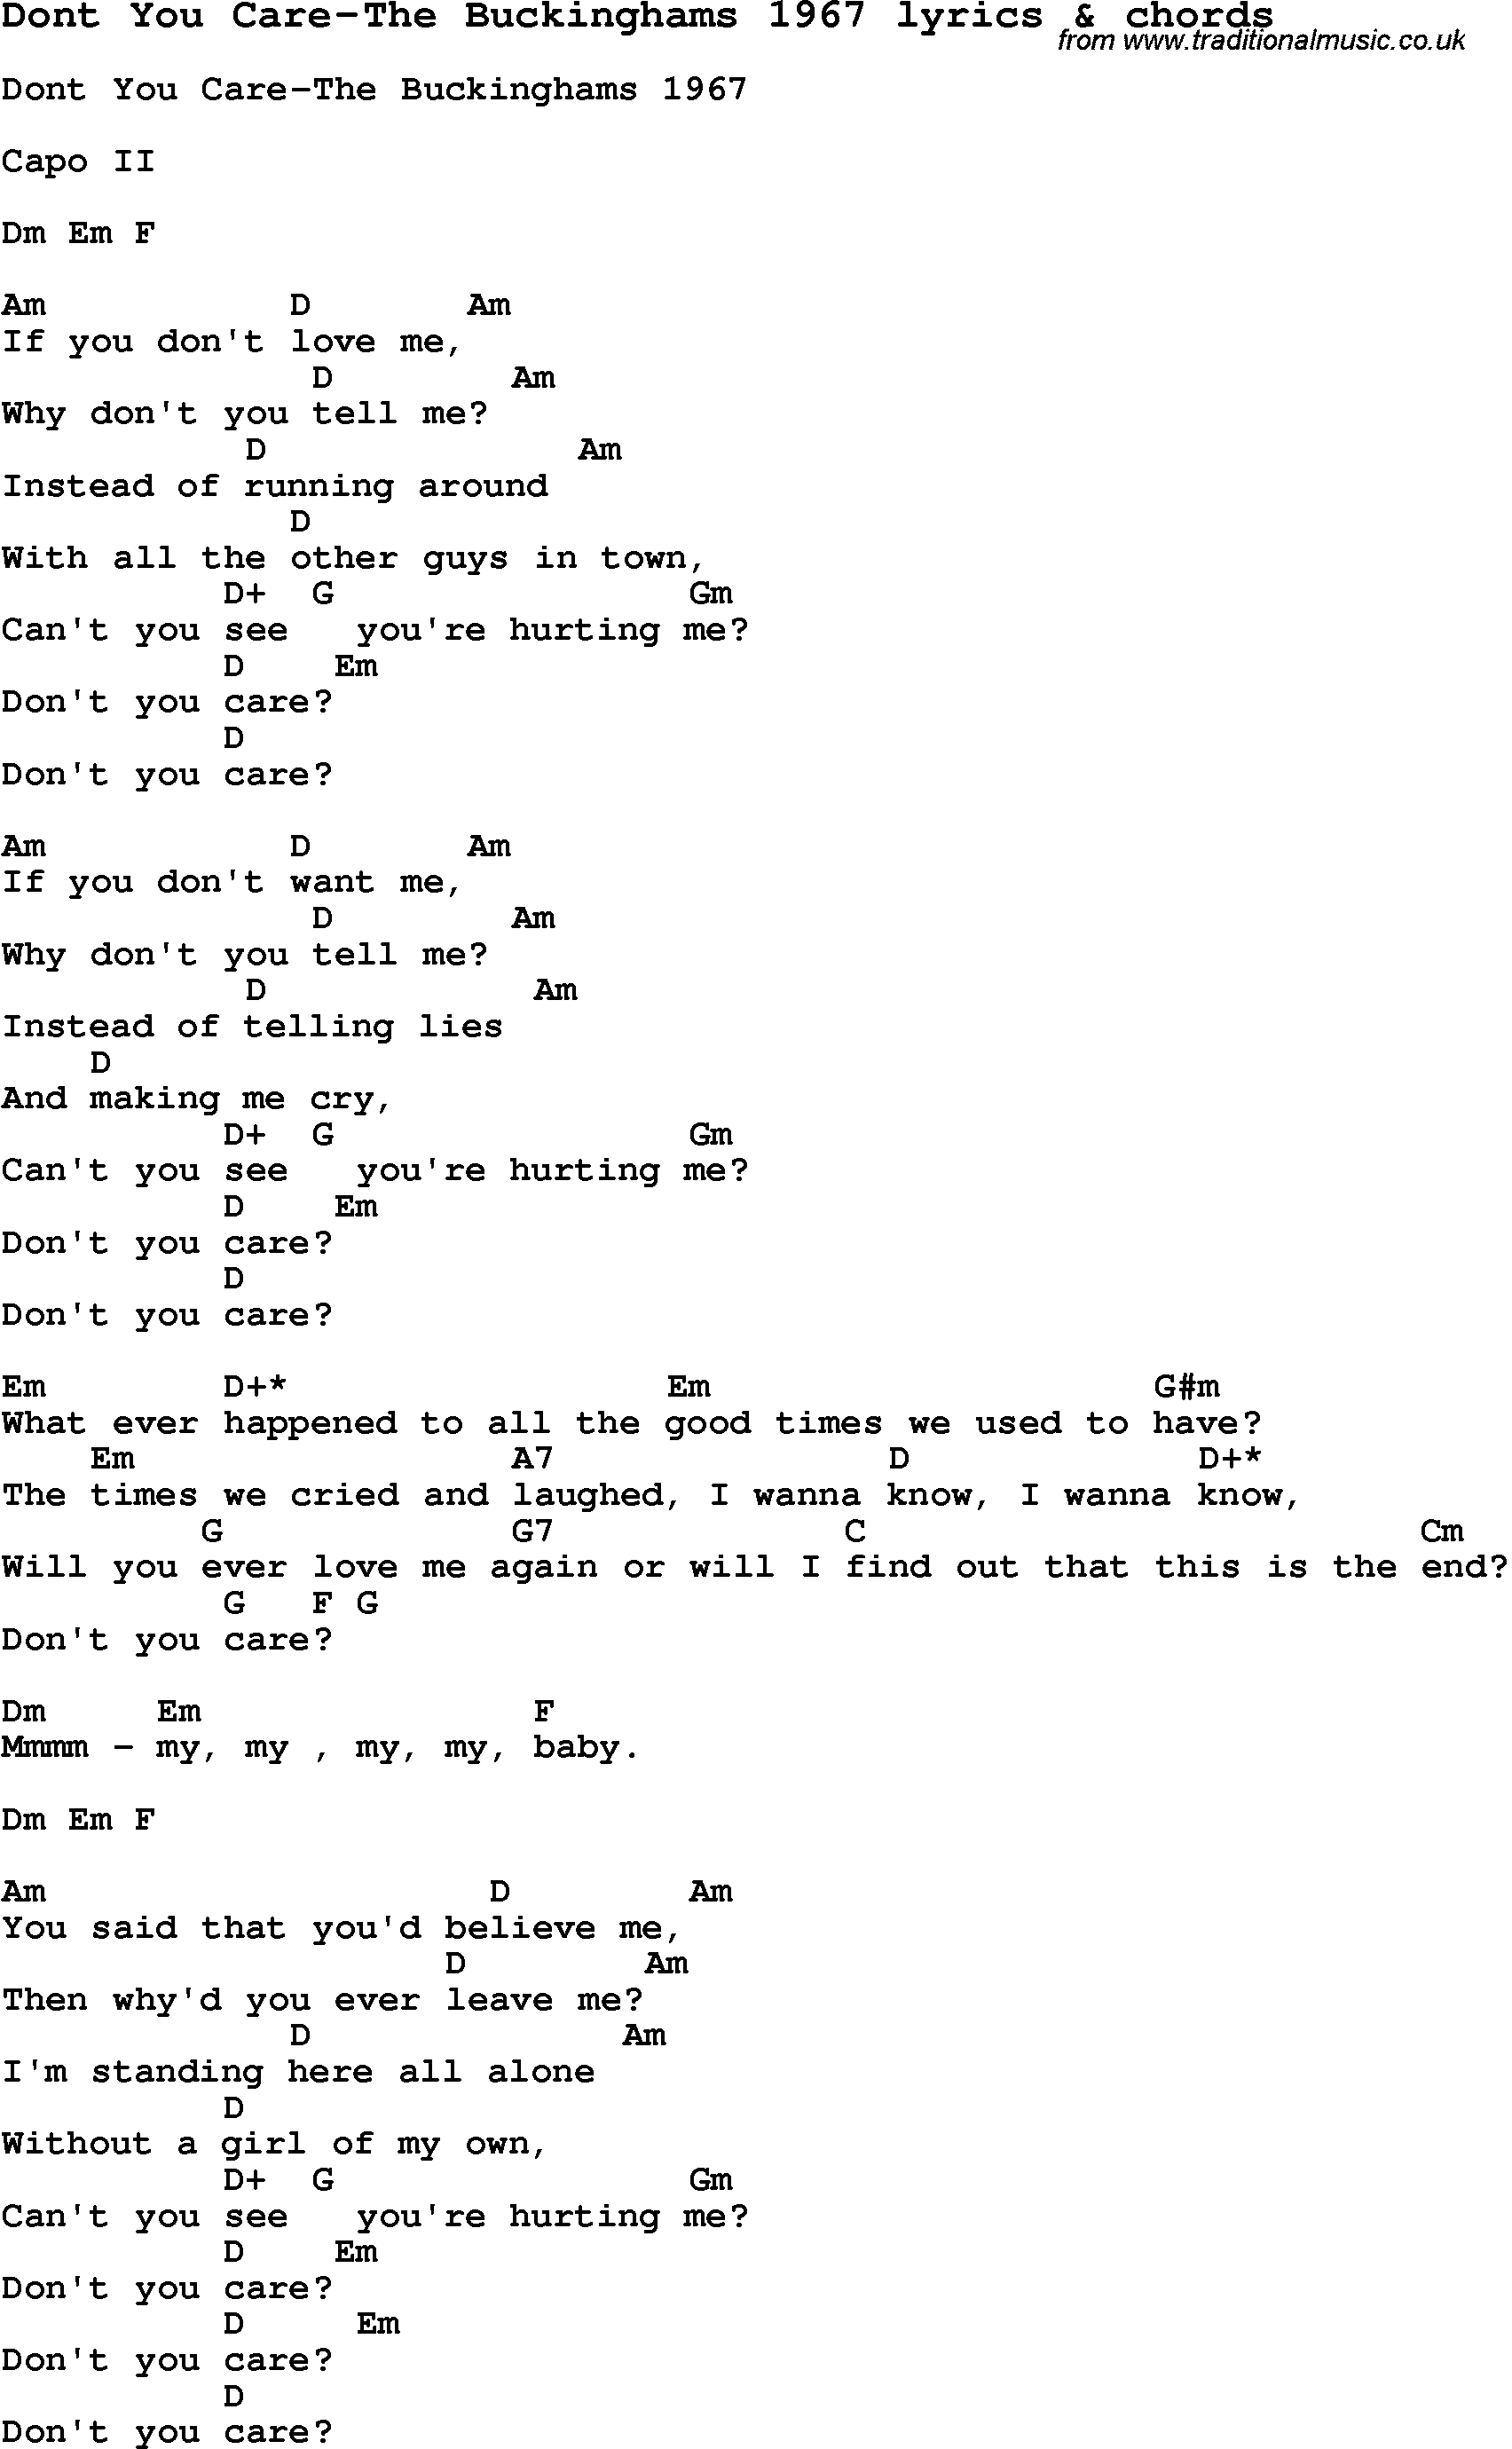 Love Song Lyrics for: Dont You Care-The Buckinghams 1967 with chords for Ukulele, Guitar Banjo etc.